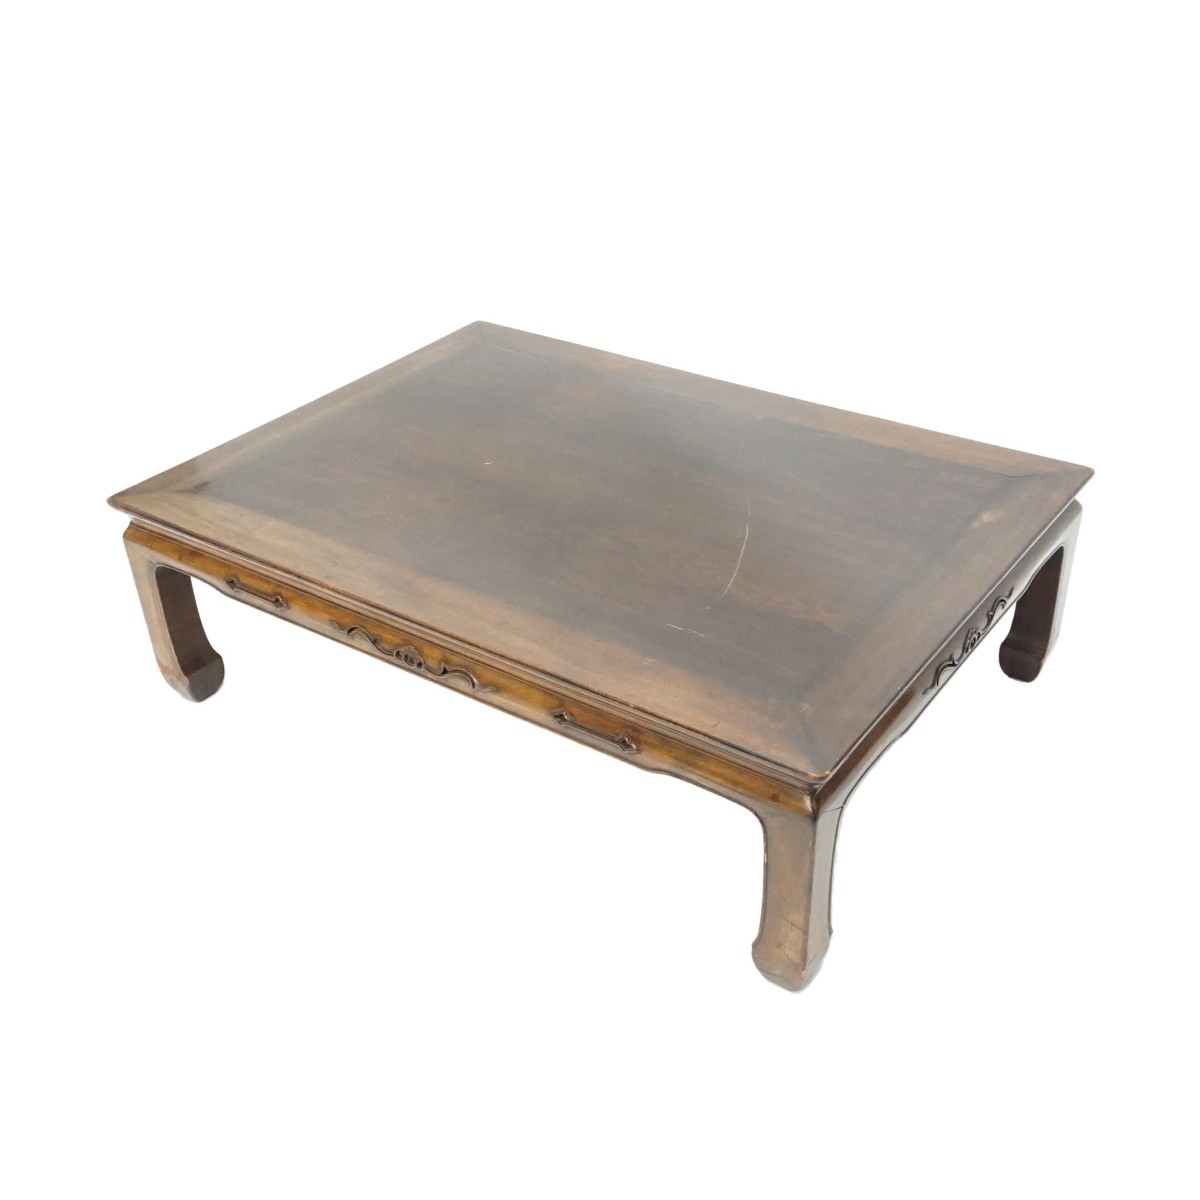 Low Chinese Wooden Coffee Table